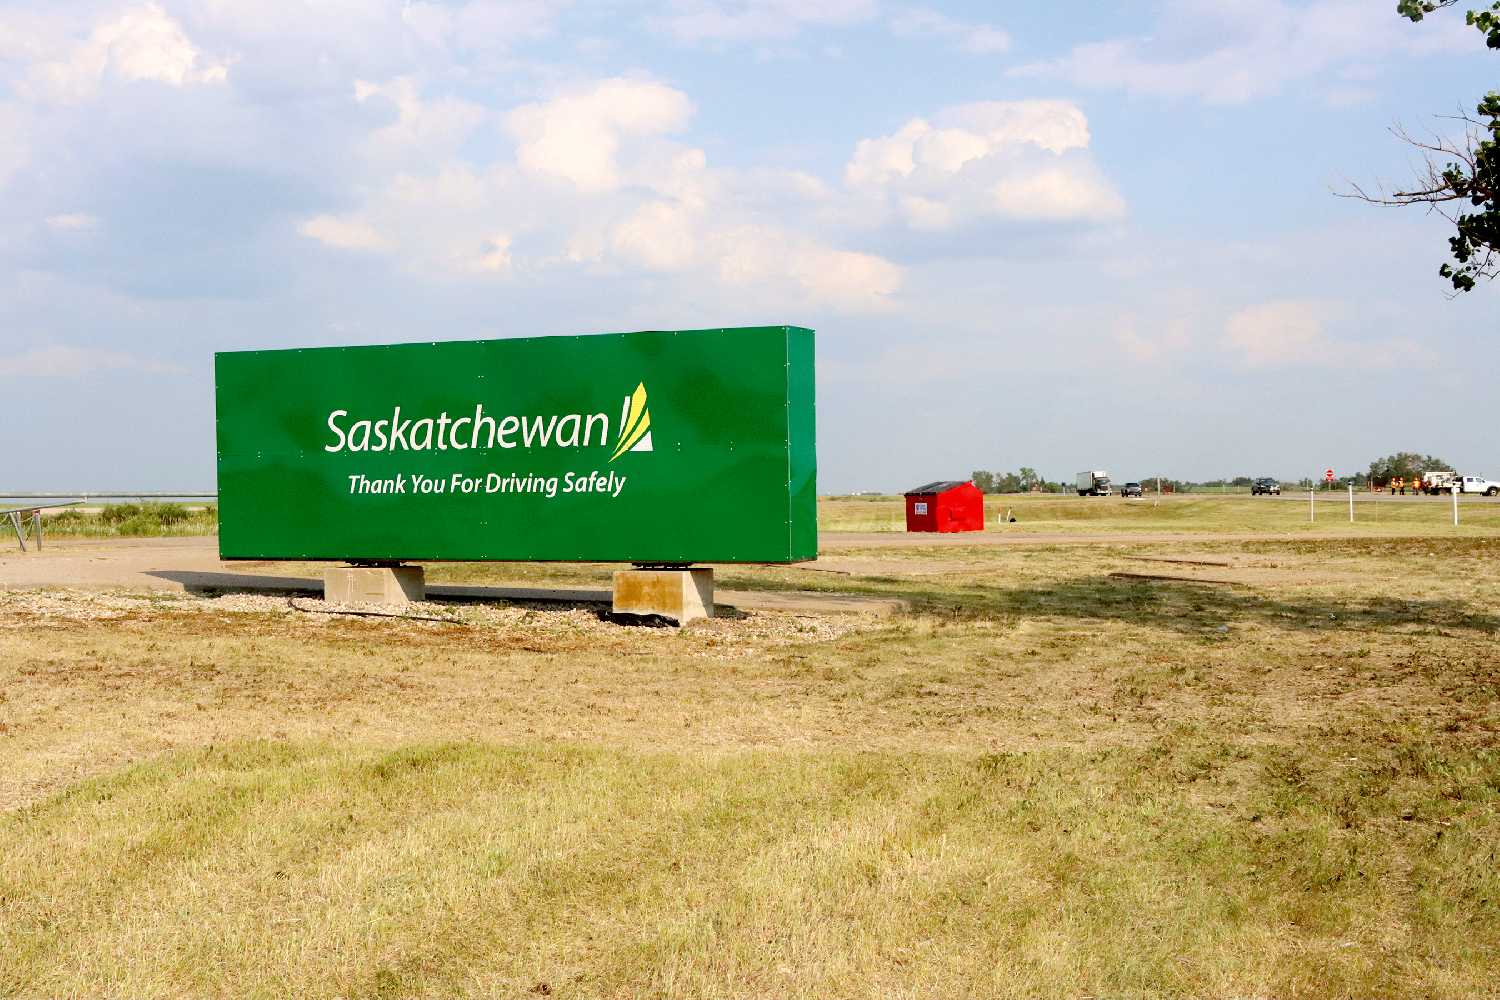 After concerns were raised by tourists and locals, the Ministry of Highways cleaned up the Welcome to Saskatchewan site and placed a garbage bin to help reduce littering.